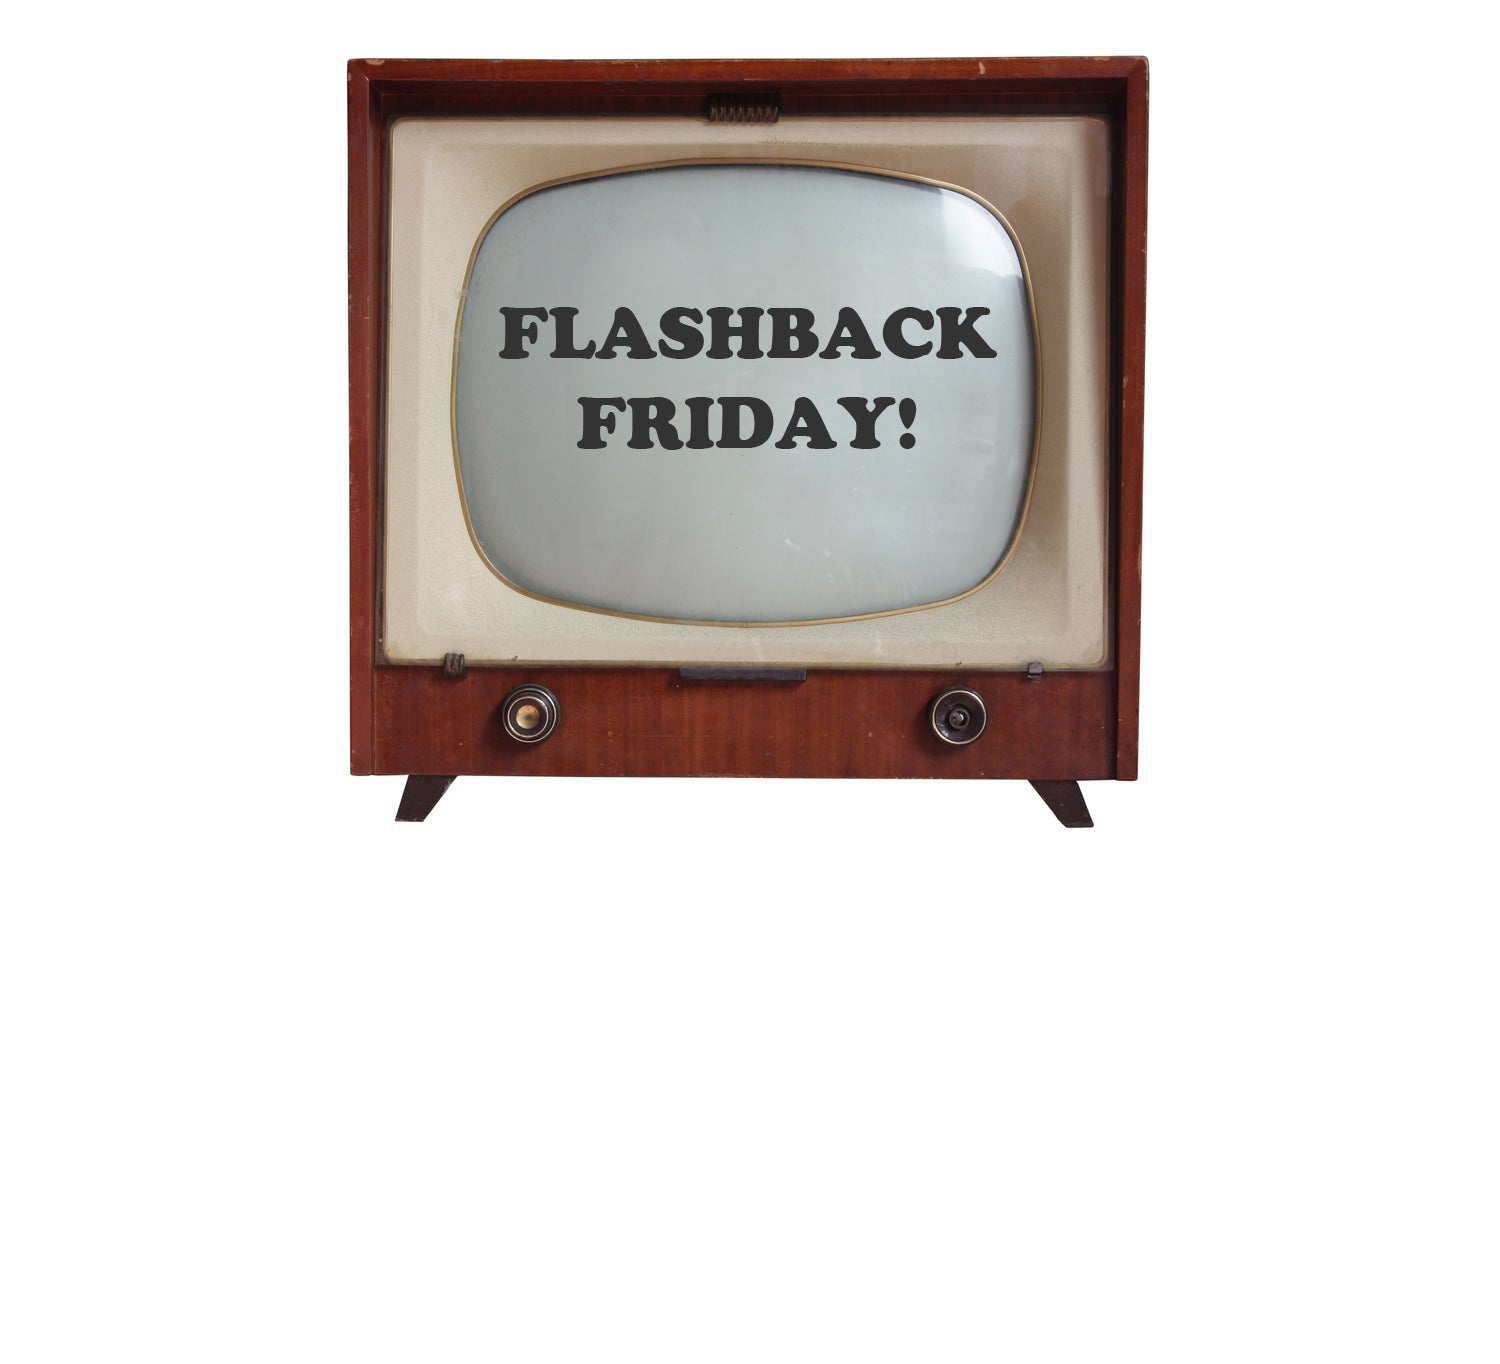 flashback friday (aug. 6): this week's links from the youth ministry blogosphere